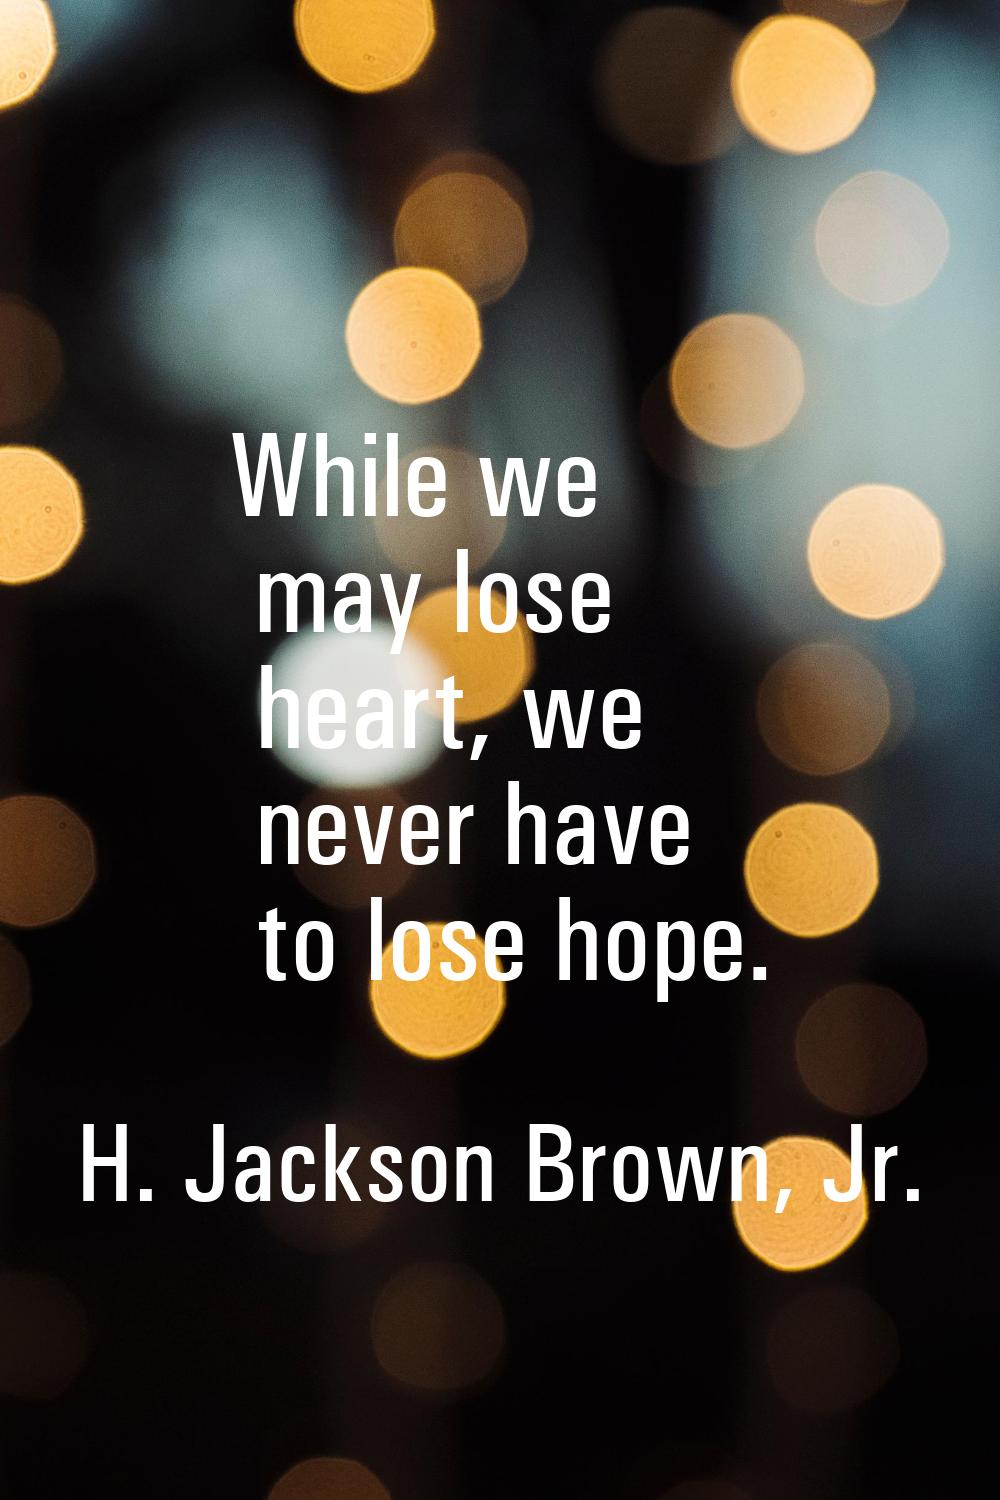 While we may lose heart, we never have to lose hope.